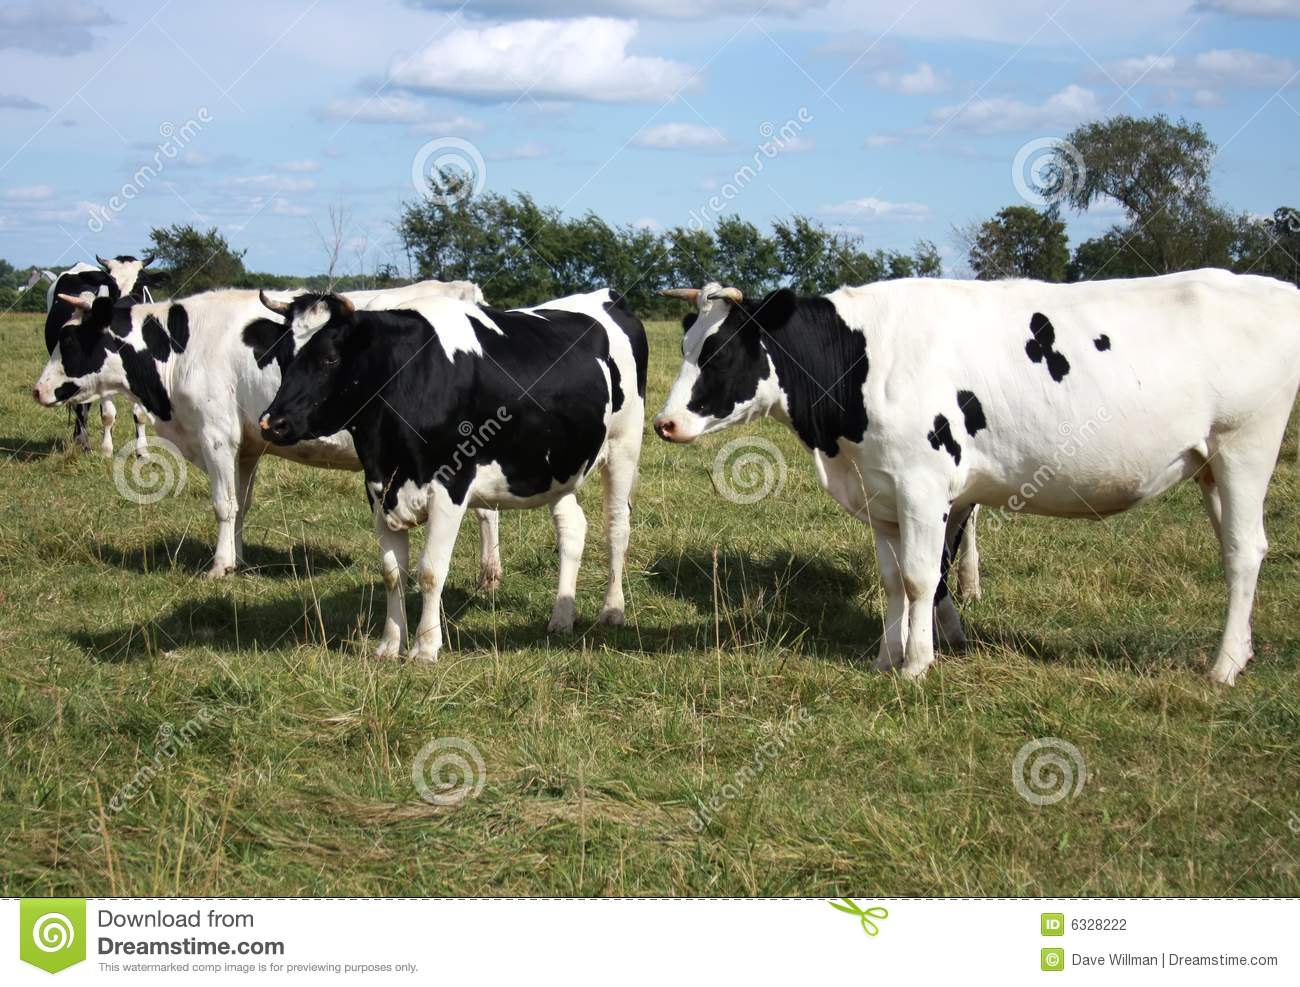 More Similar Stock Images Of   Herd Of Holstein Cows